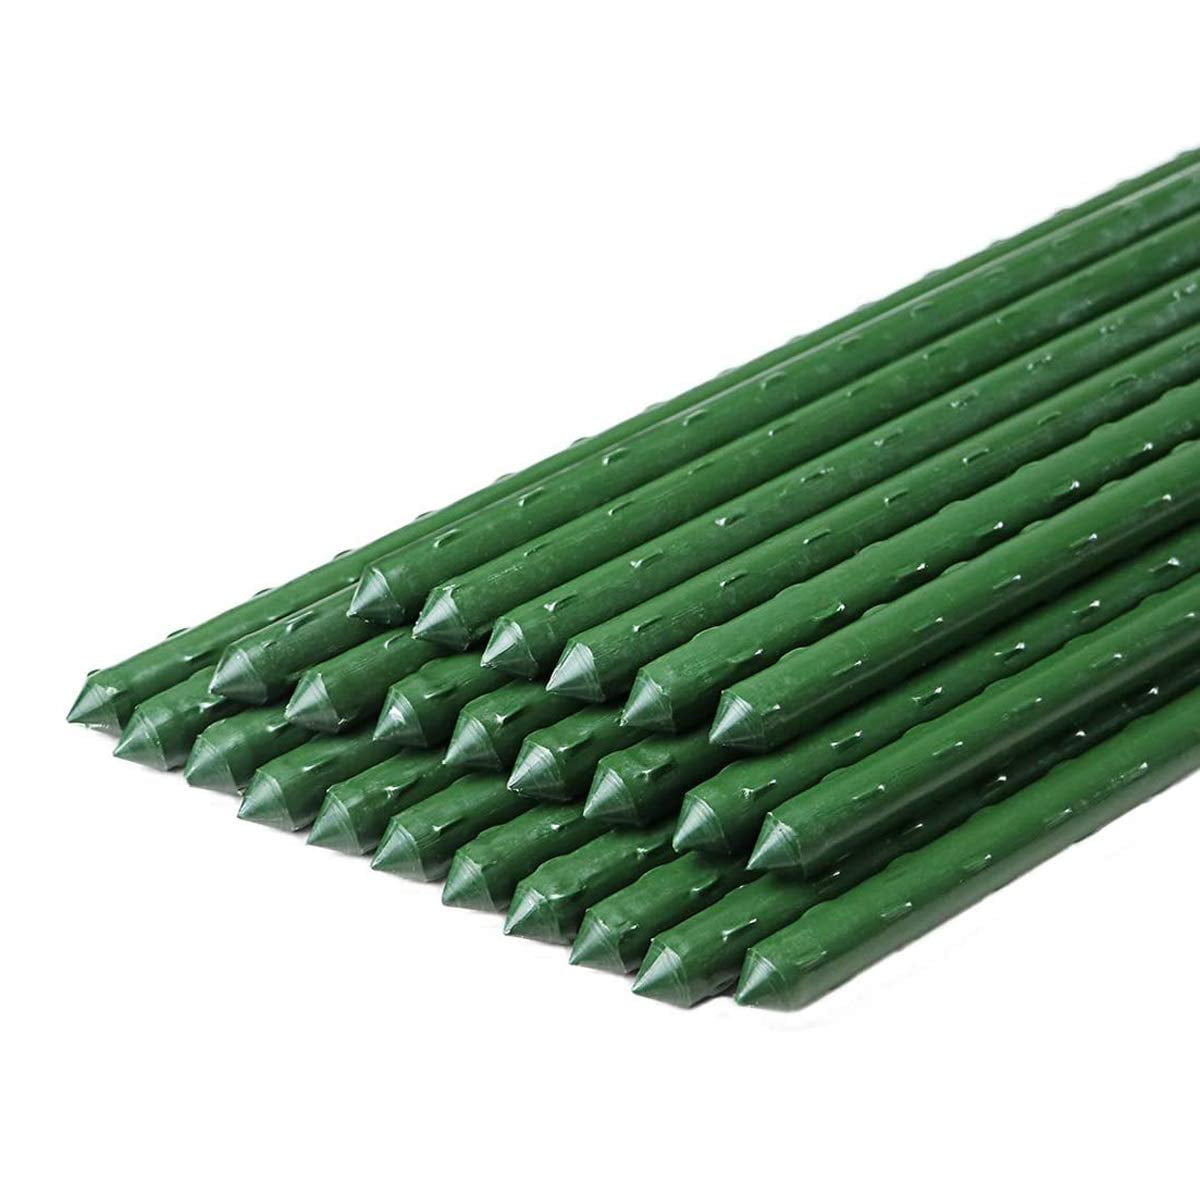 50Pcs 4FT x 9mm Garden Plant Stakes Support for Tomato Climbing Plants Grow 